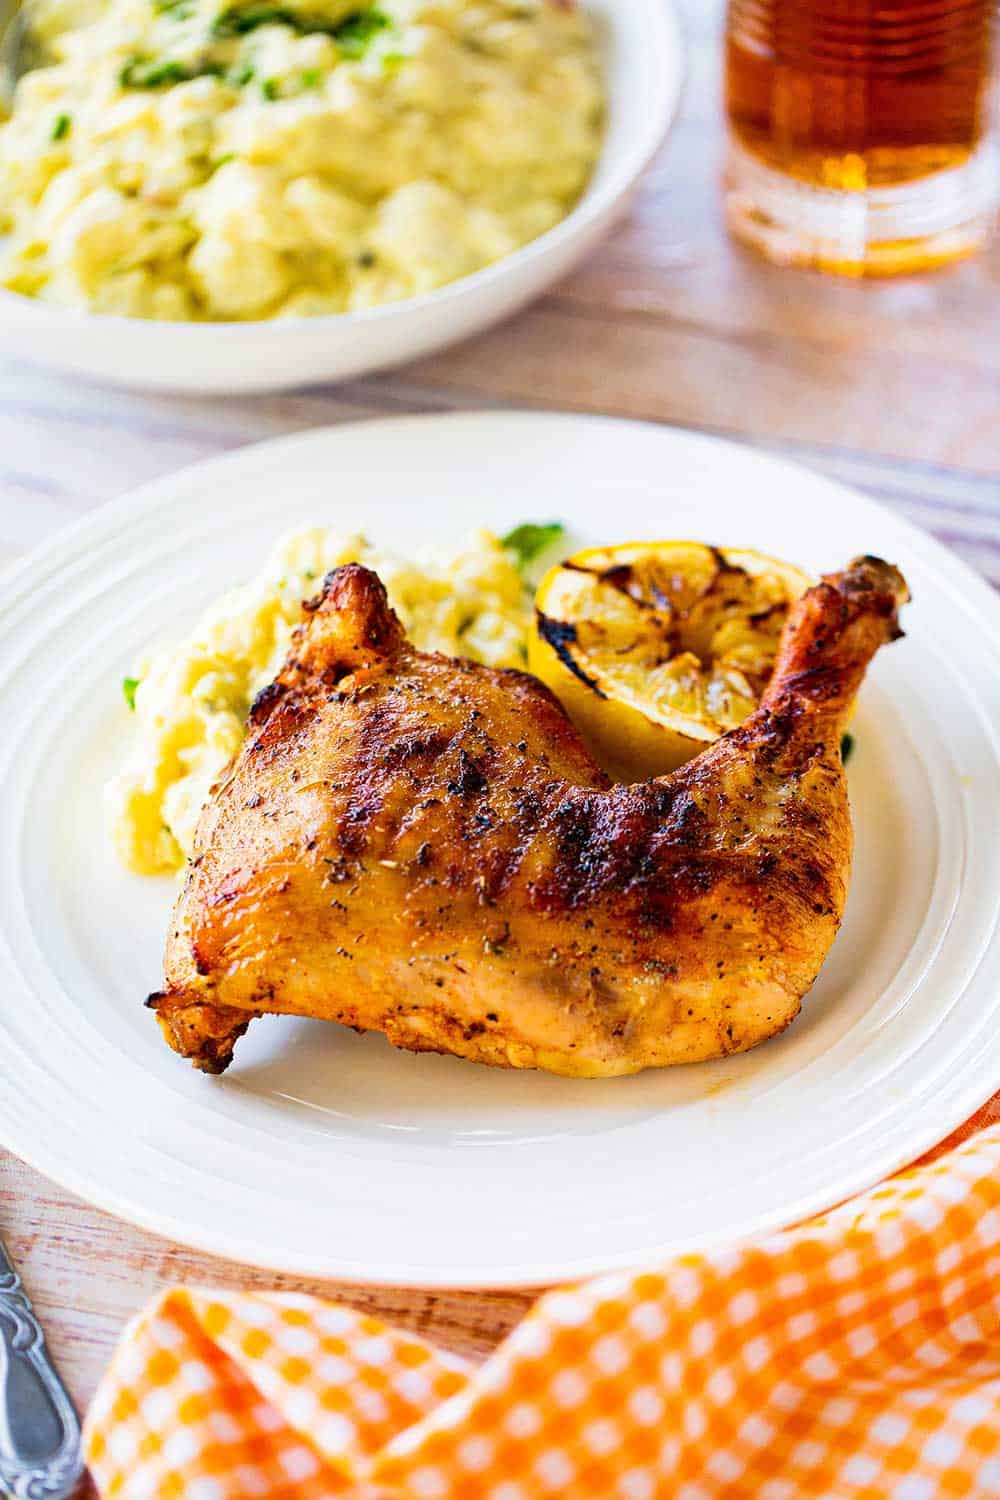 A grilled chicken leg quarter sitting on a plate next to a grilled lemon half and potato salad.